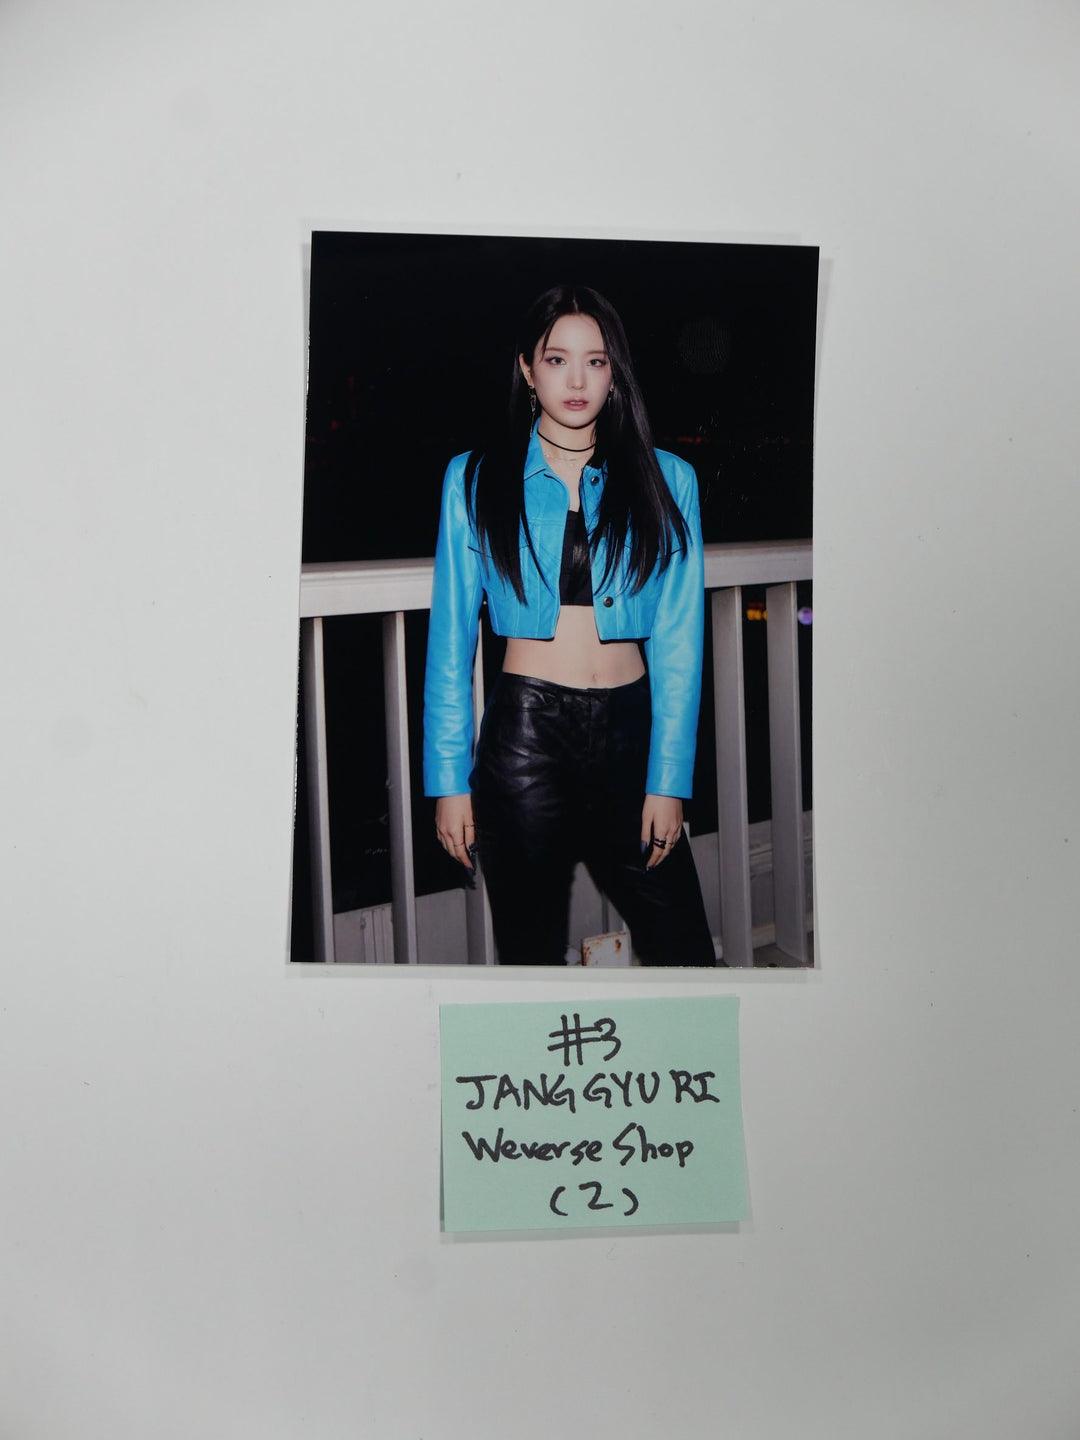 Fromis_9 "Midnight Guest" - Weverse Shop Pre-Order Benefit Photo Round 2